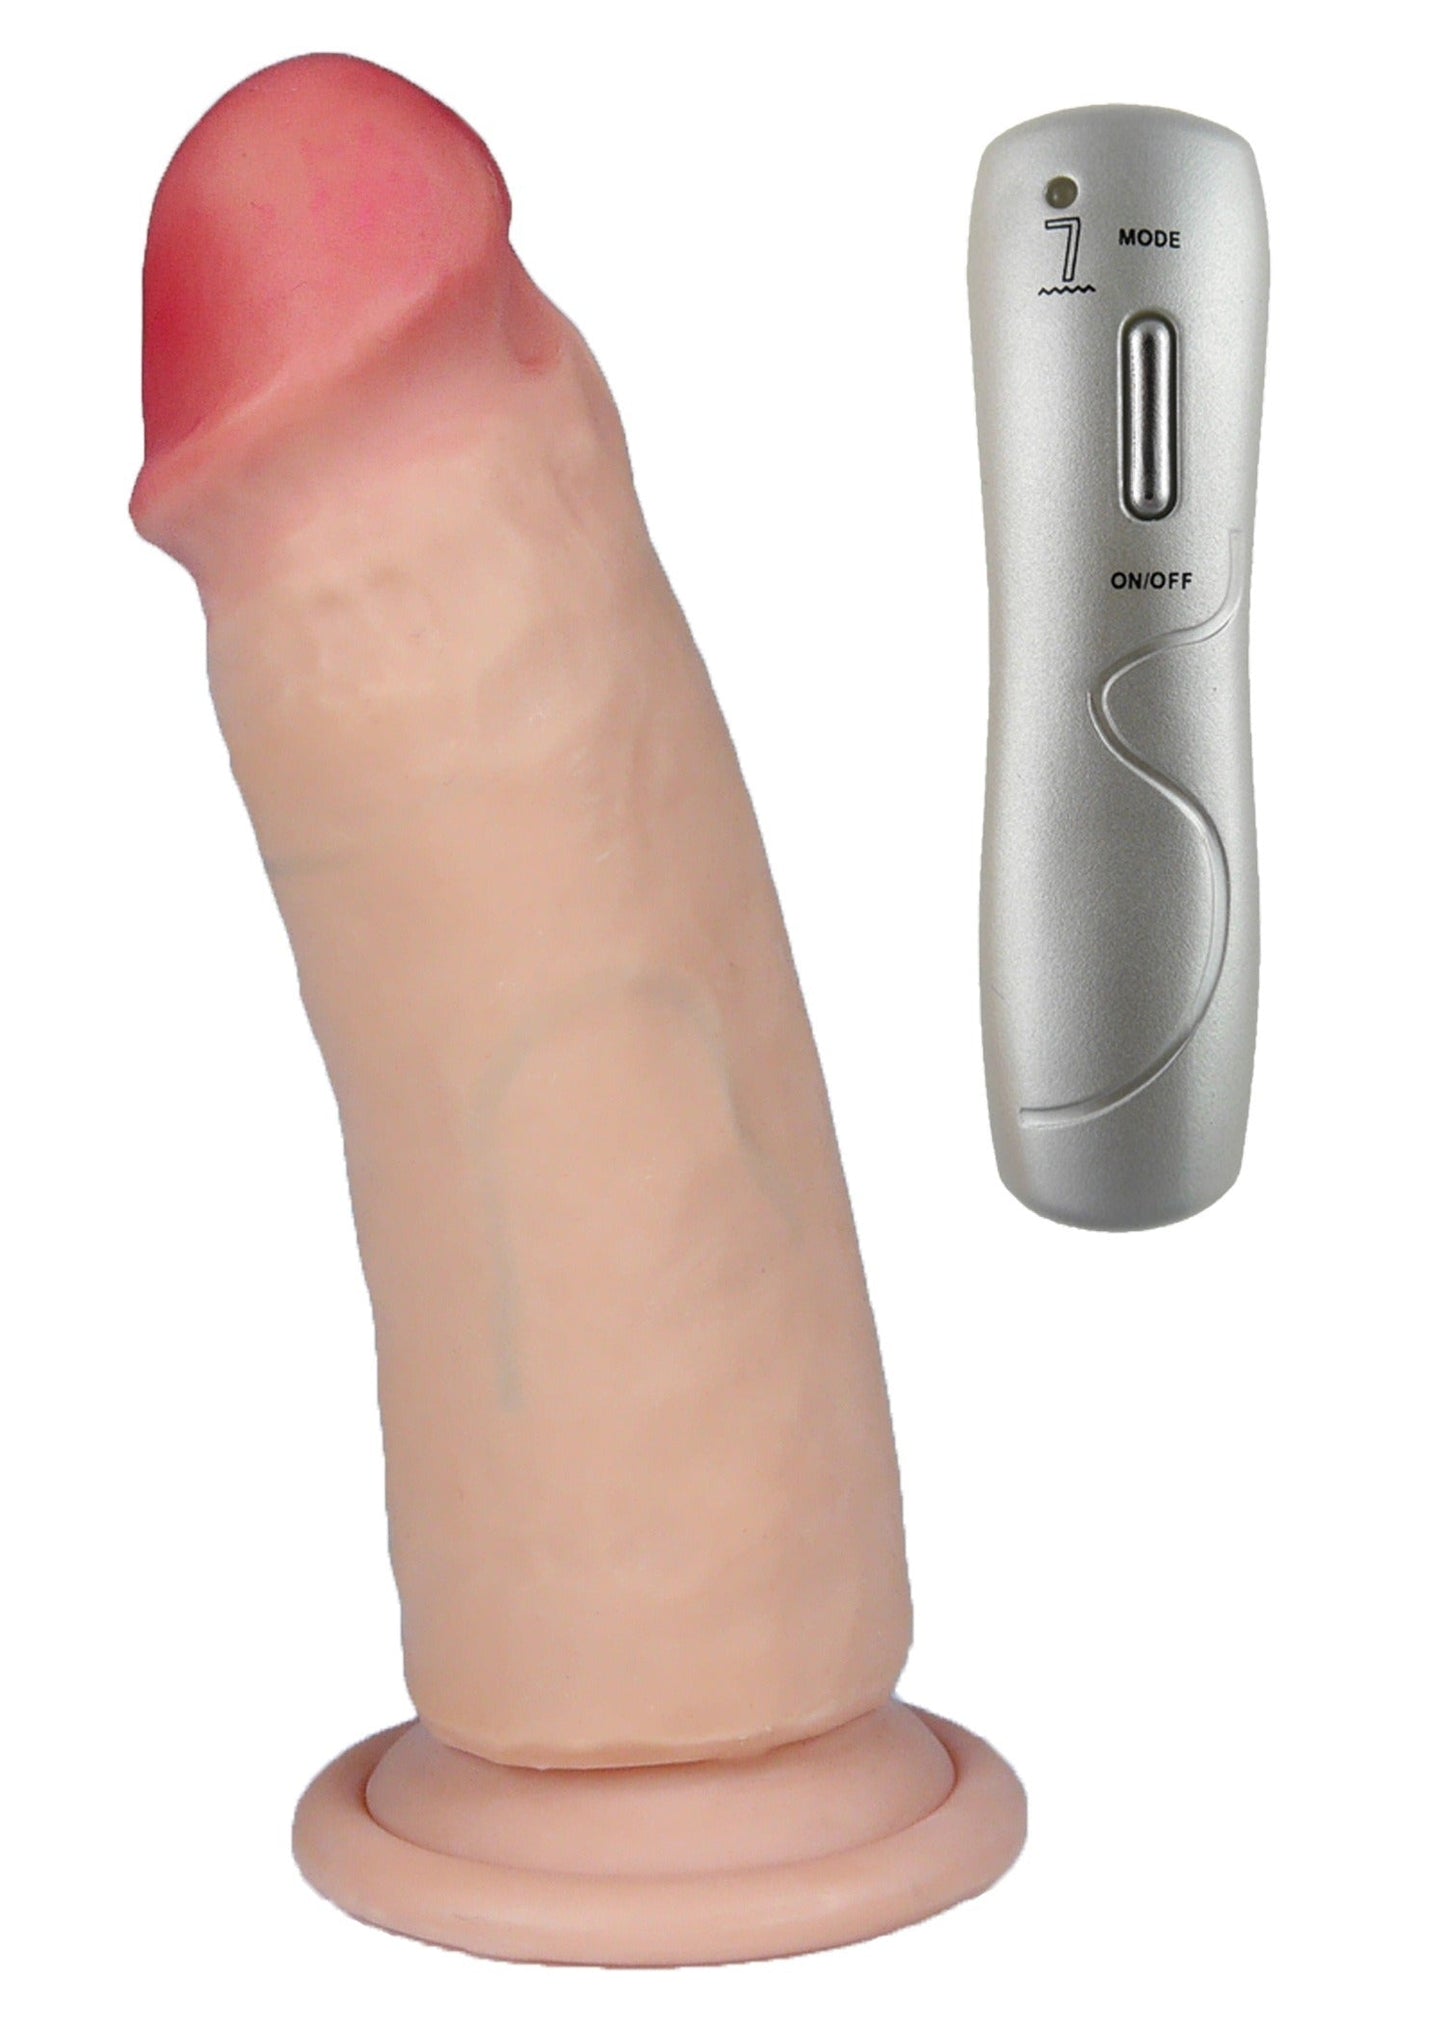 Bossoftoys Fobos Loveclonex Ultra Realistic Vibrator - Ultra Realistic Vibrator - Cyber skin feels like real - 21-00033- Better then Silicone - 5-7 cm thick - Suction Cup - Wired Remote - Flesh - 6 inch / 15 cm